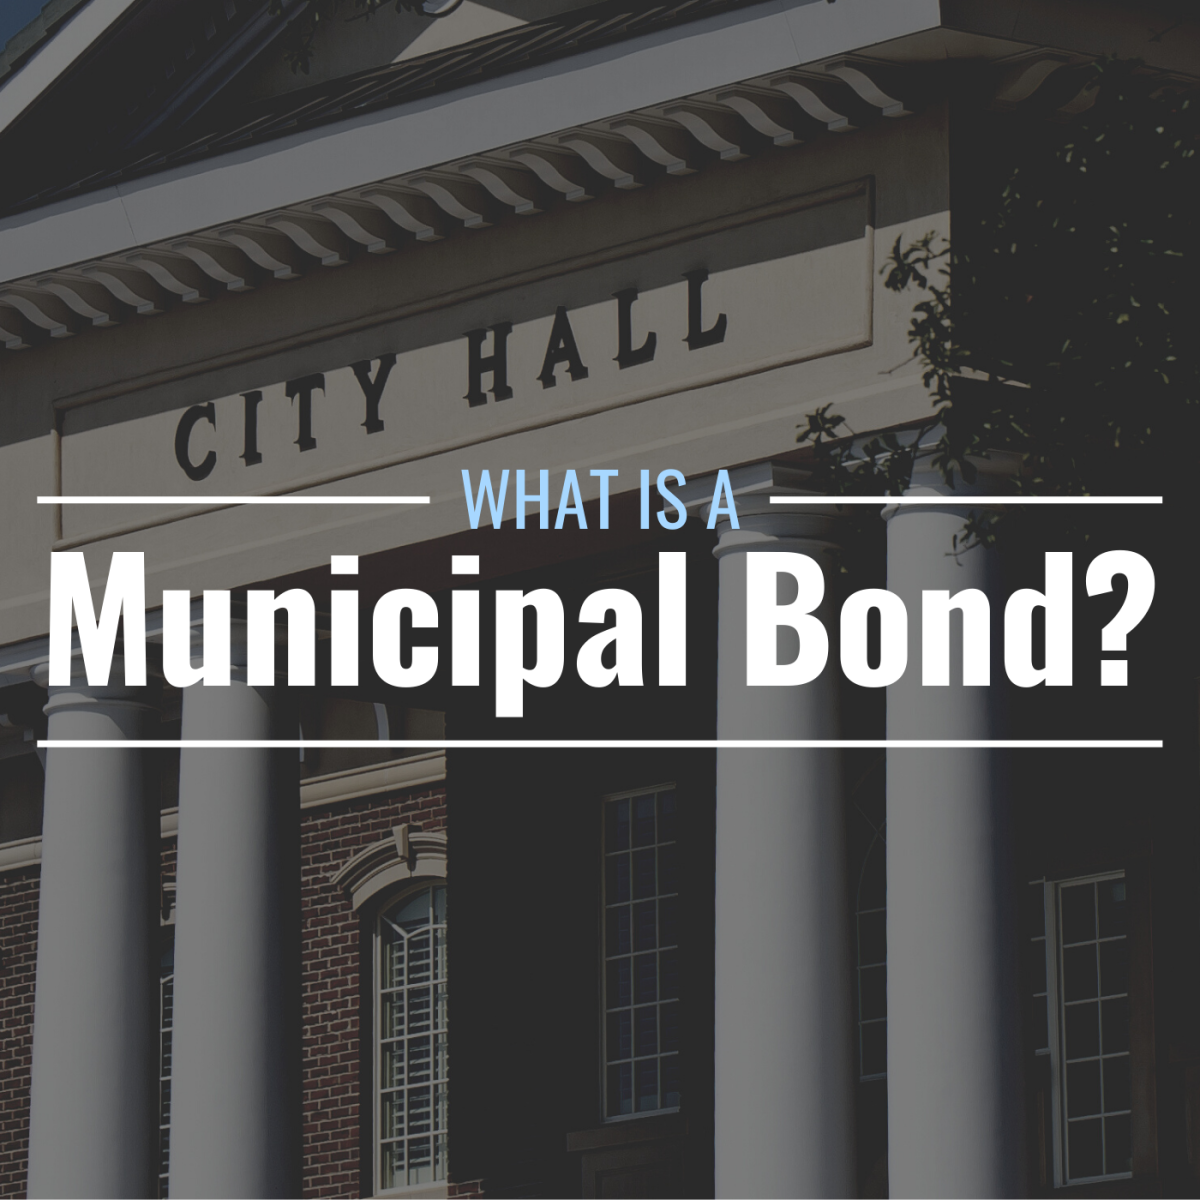 Darkened photo of a city hall building with text overlay that reads "What Is a Municipal Bond?"Darryl Brooks